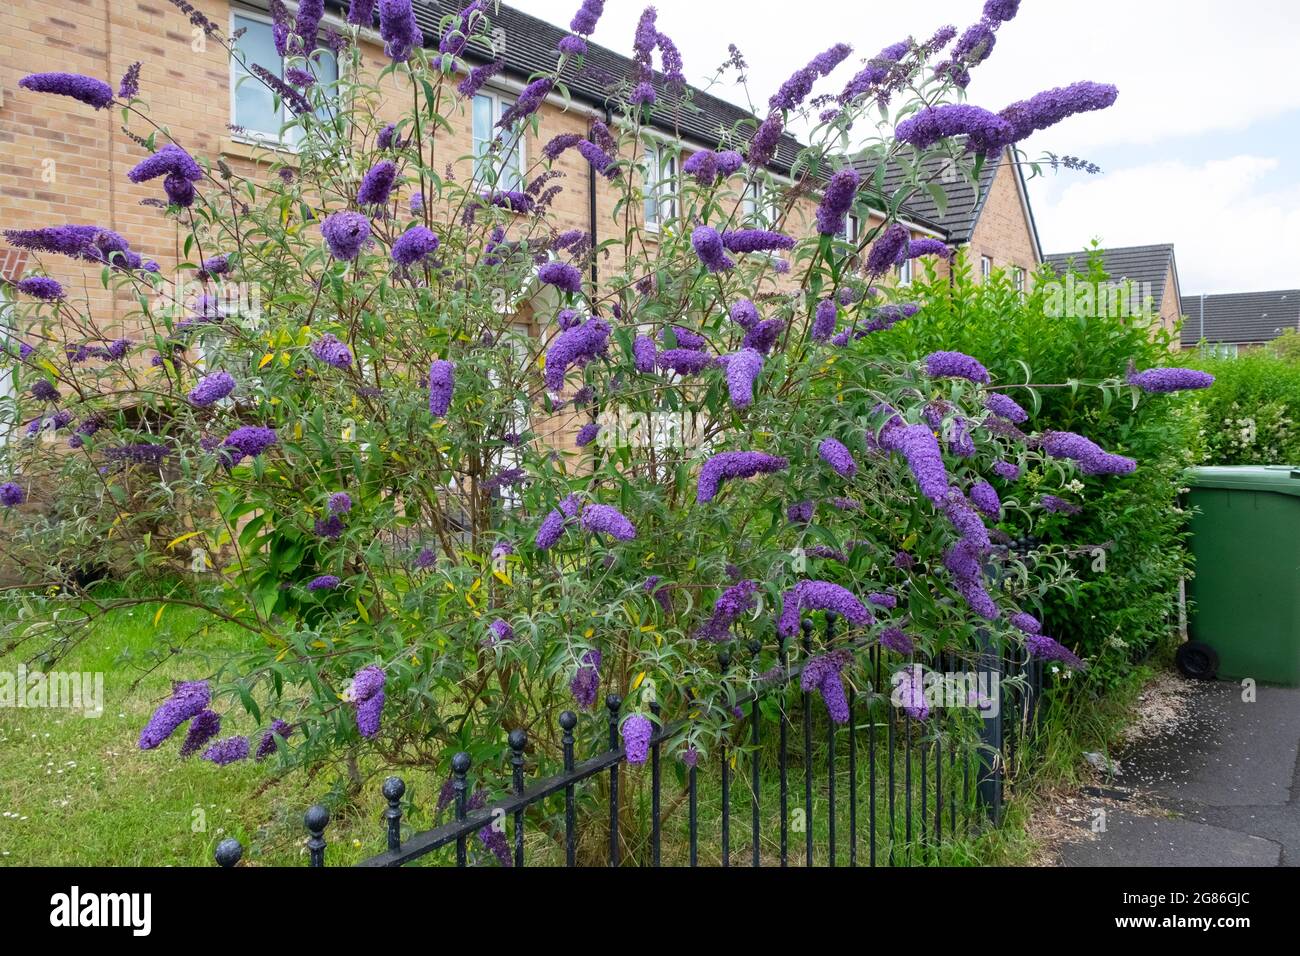 Purple buddleia Buddleja davidii perennial shrub blooming in summer in a new build home front garden Cardiff Wales UK    KATHY DEWITT Stock Photo